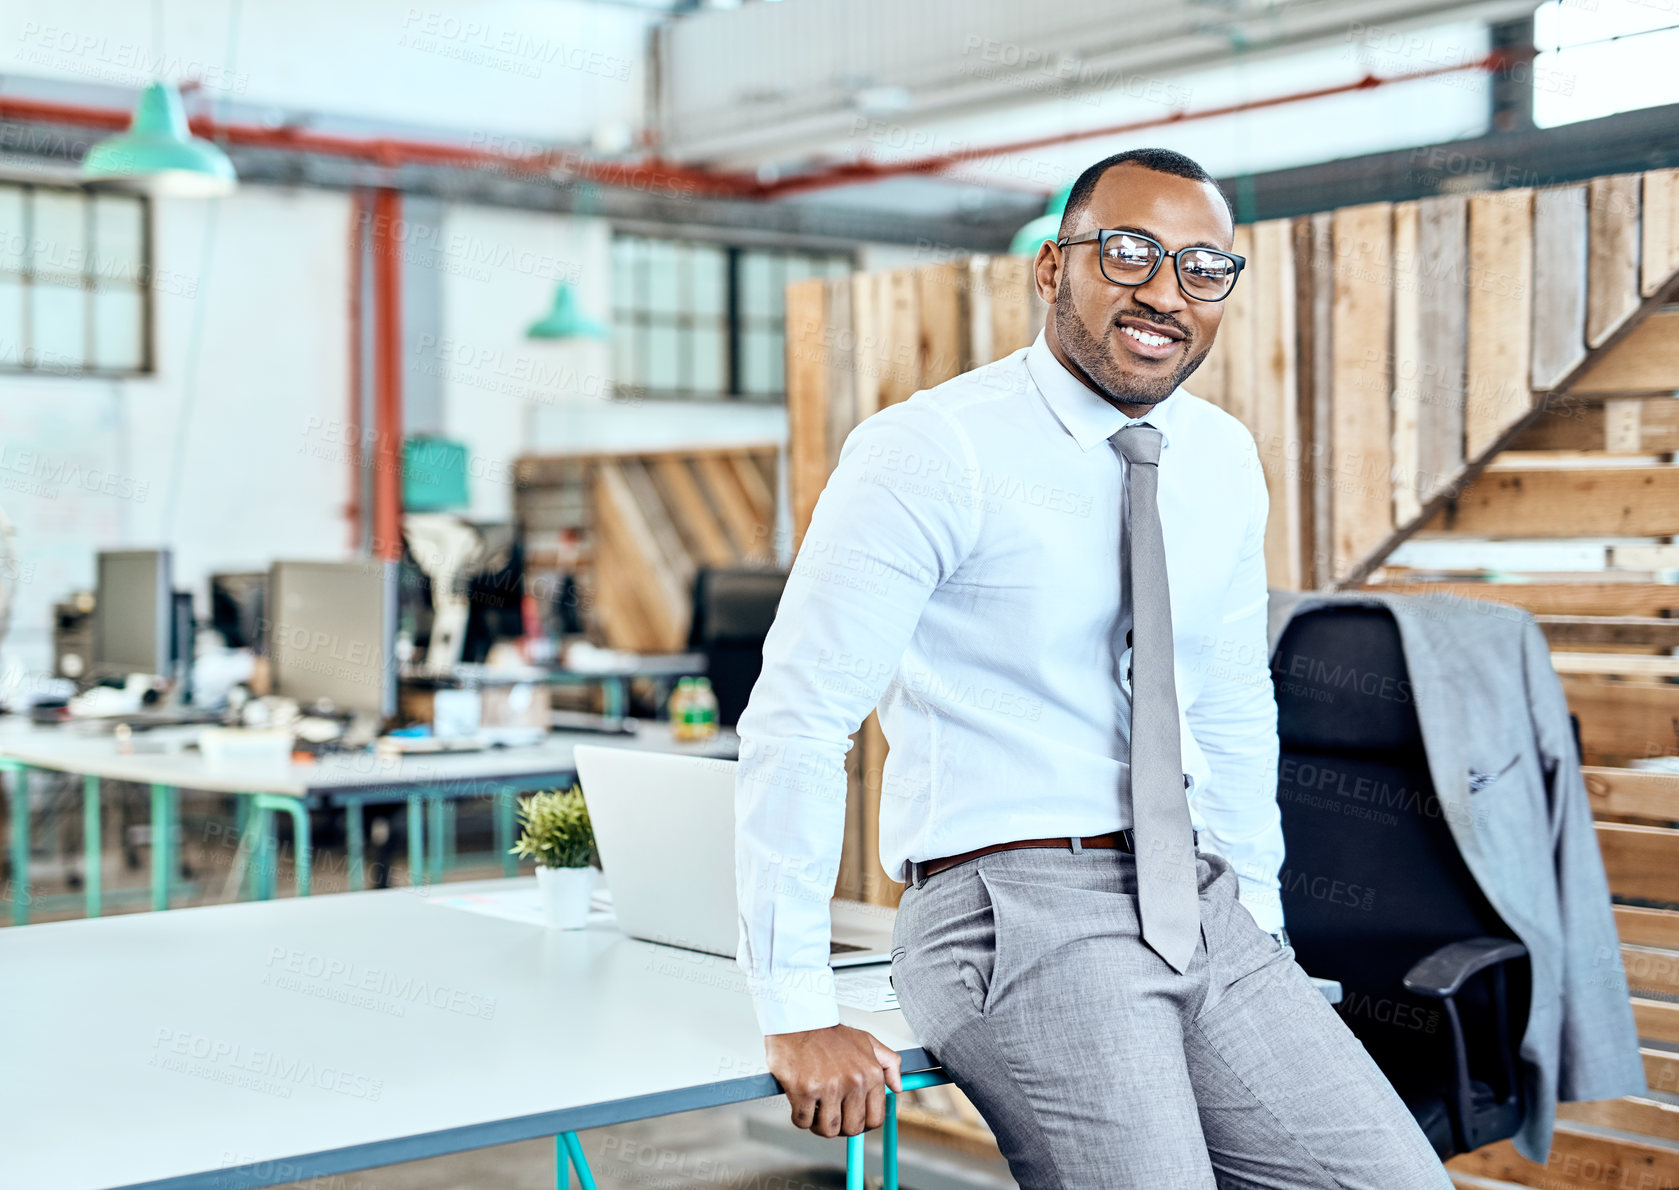 Buy stock photo Portrait of a young businessman standing in an office